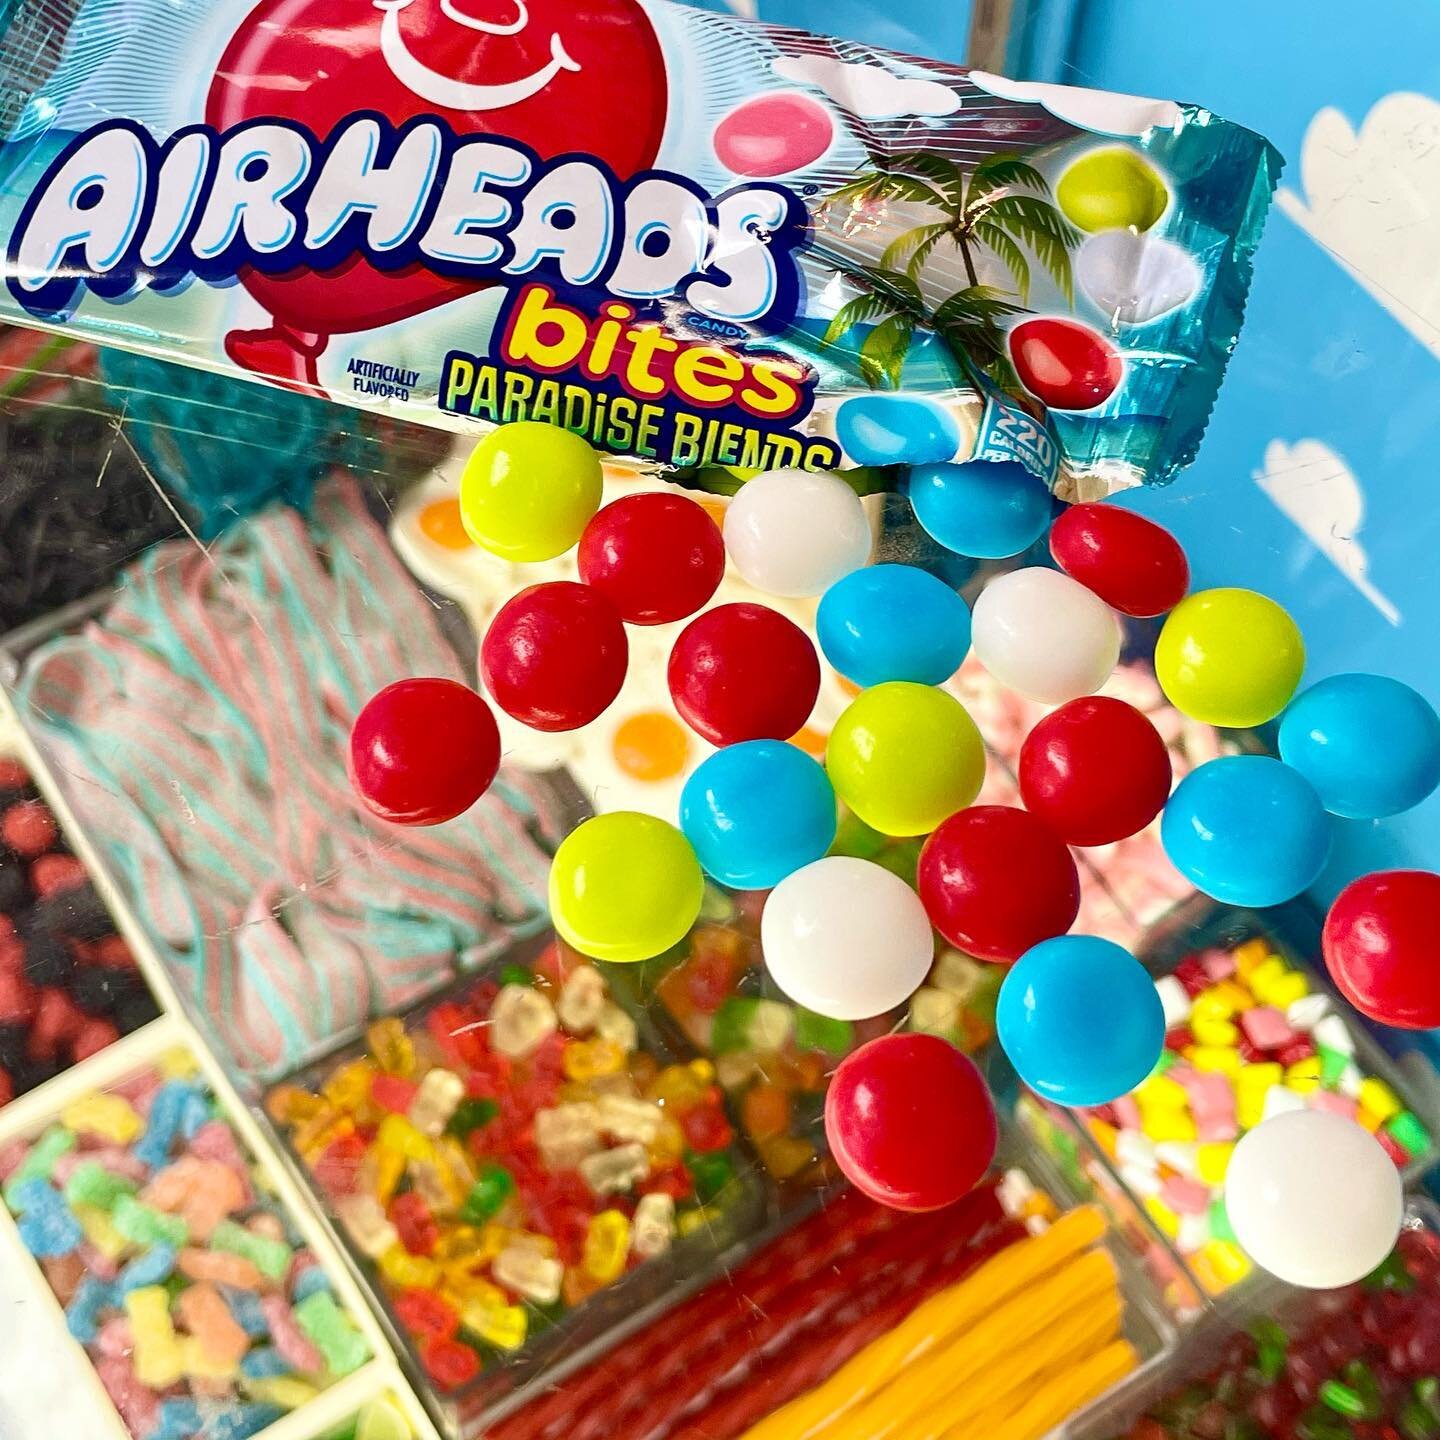 If the The Candy Unicornium wasnt already a Candy Paradise... we now have a Paradise Blend of Airheads!! In Bite Size!!!! 🎈🏝😍 #TheCandyUnicornium #CandyShoppe #Airheads #candy #candycandy #candyman #discoverelizabethtown #loveetown #LIVetown #cand